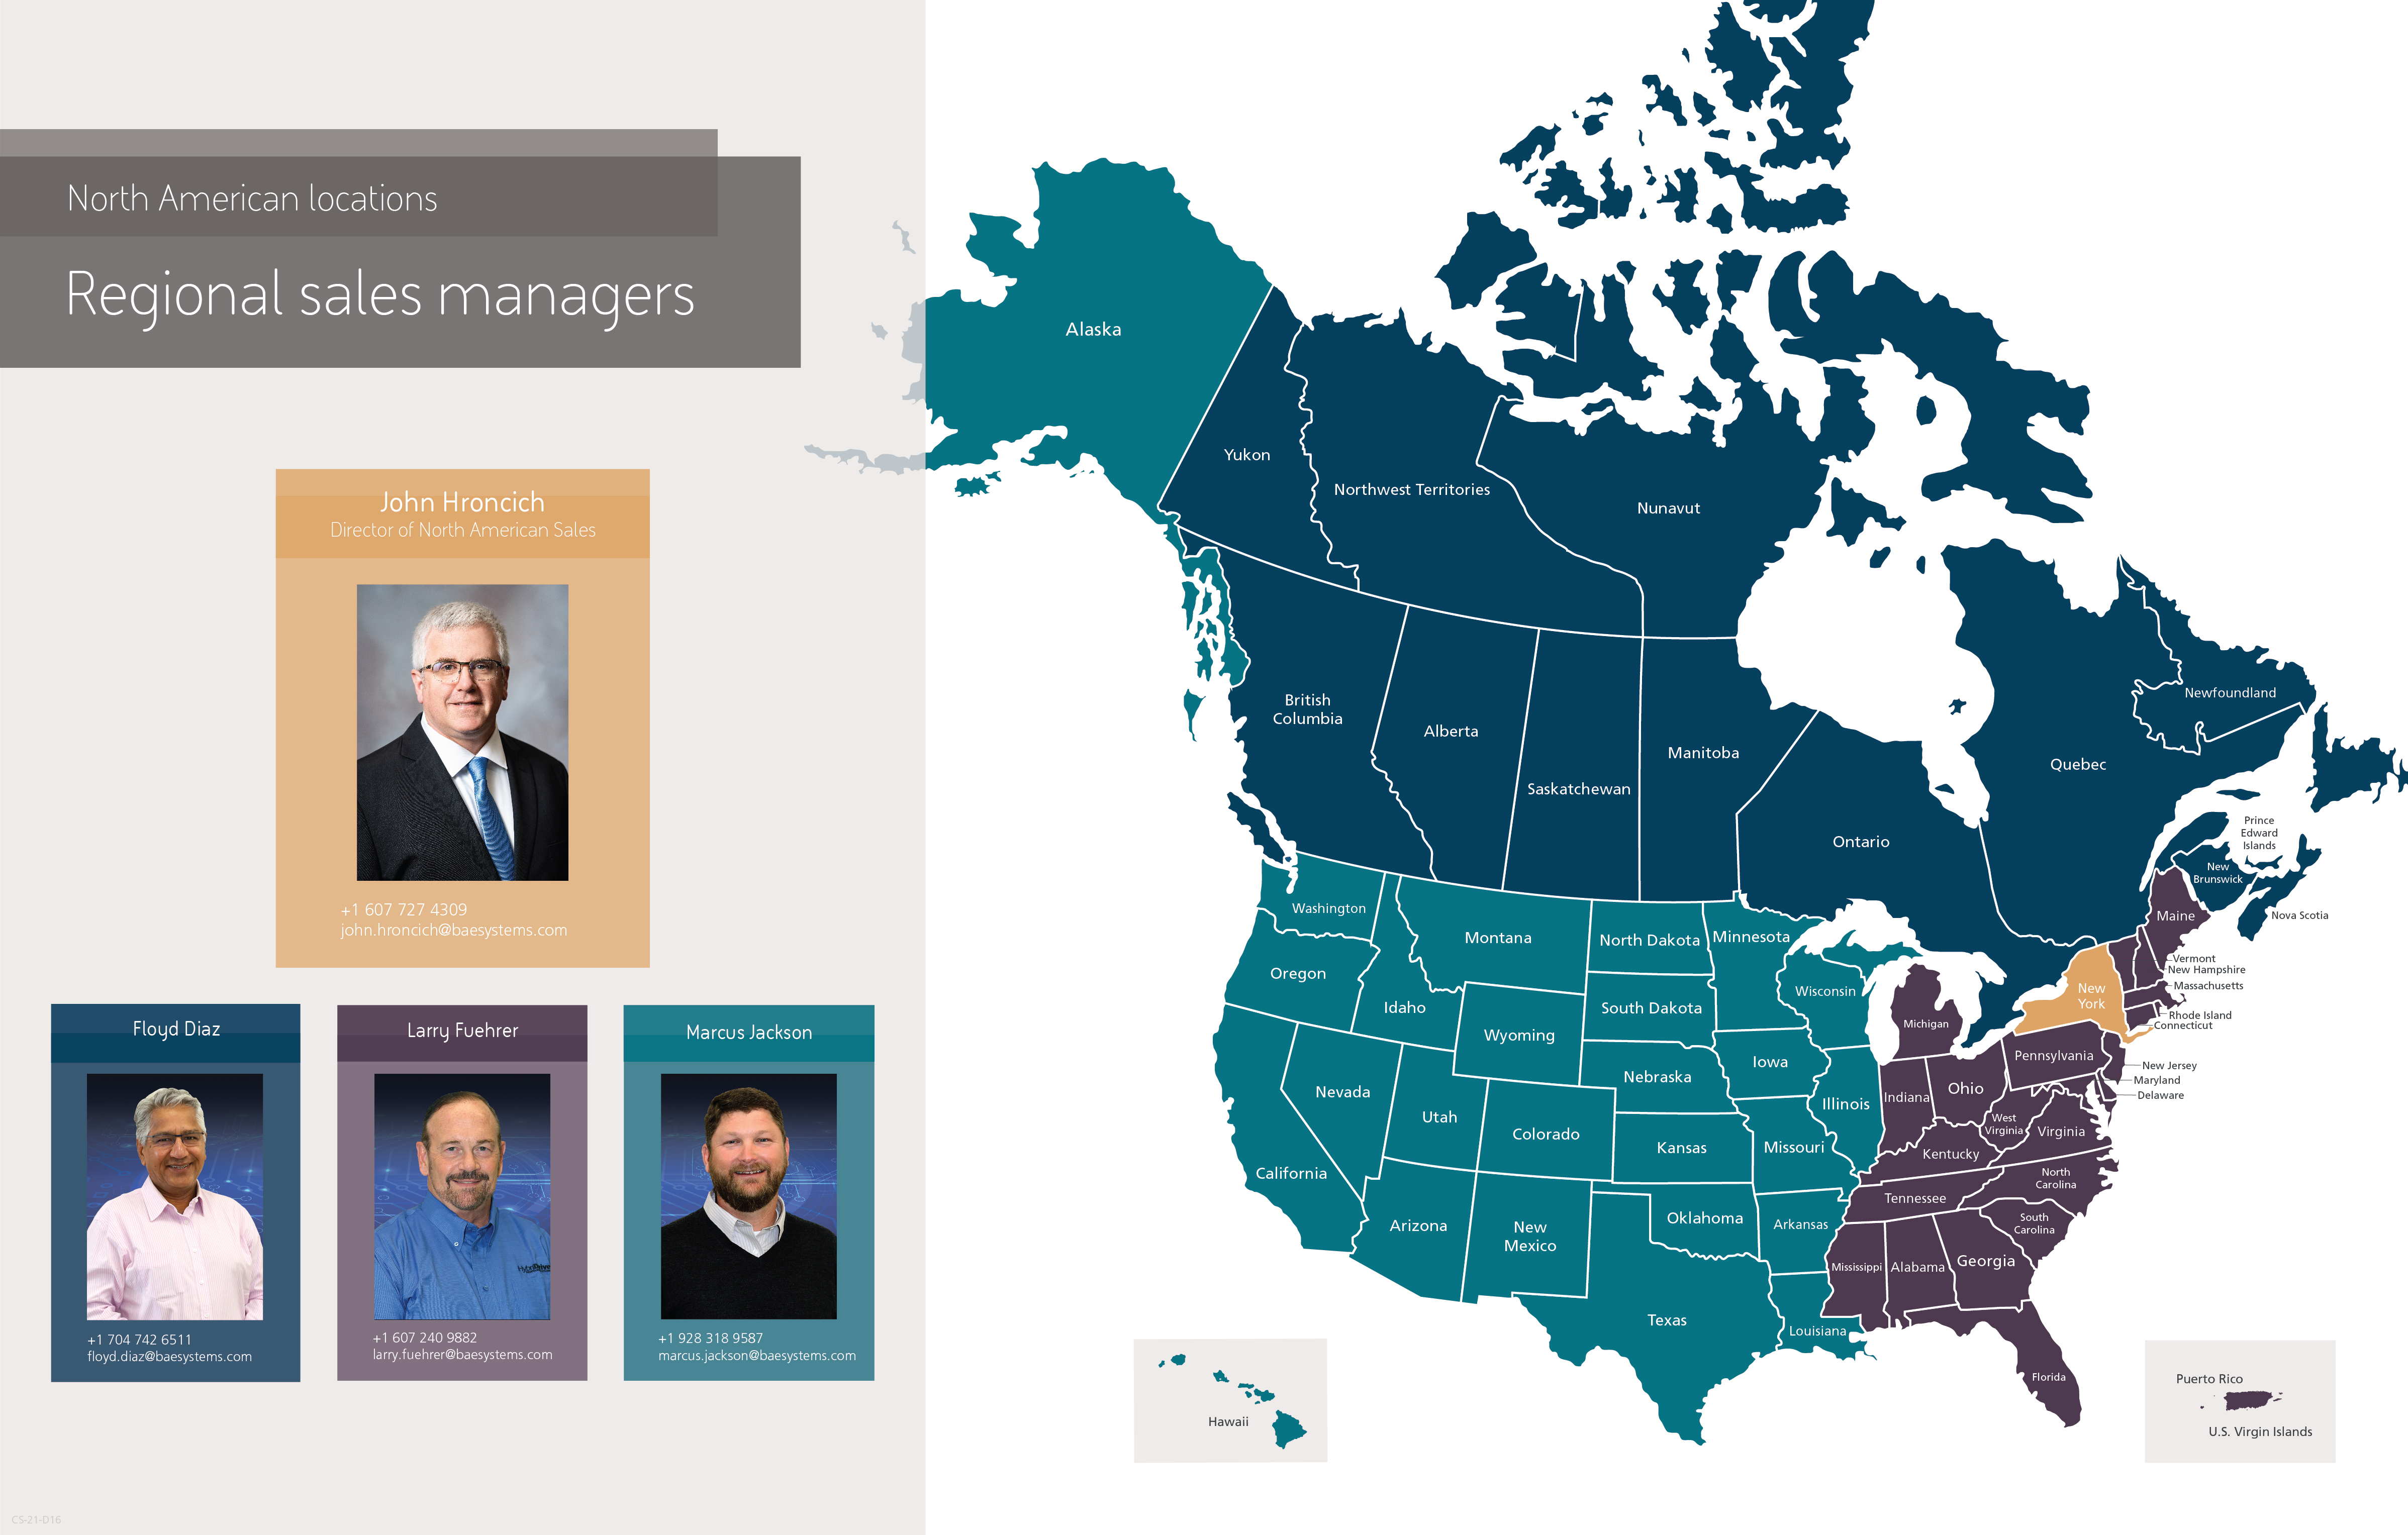 NA Regional Sales Managers and locations